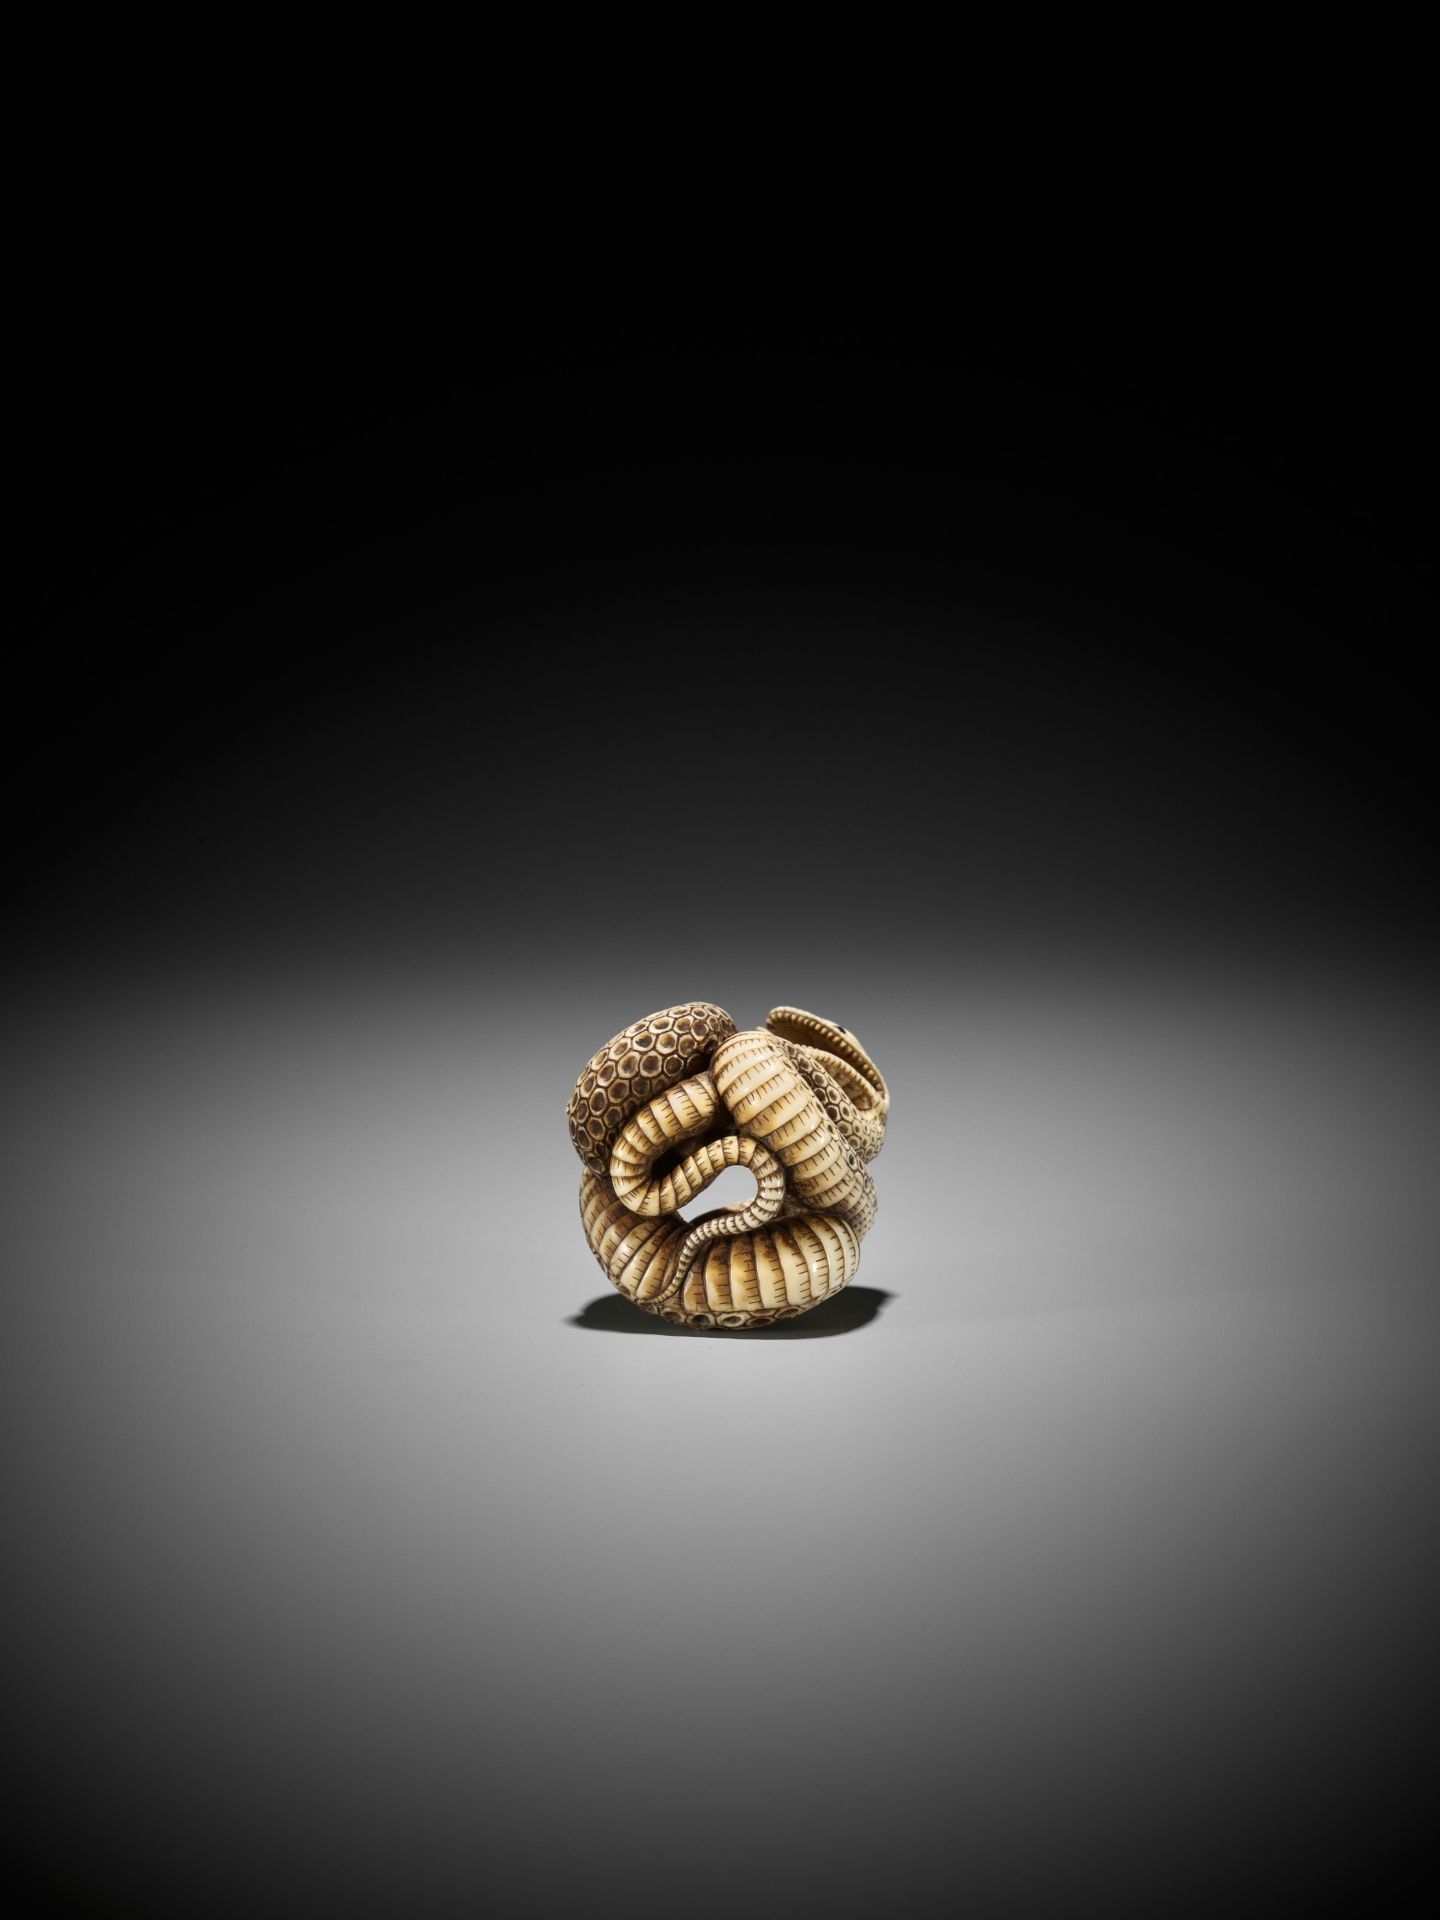 A SUPERB IVORY NETSUKE OF A SNAKE PREYING ON A FROG, ATTRIBUTED TO MASATSUGU - Bild 3 aus 16